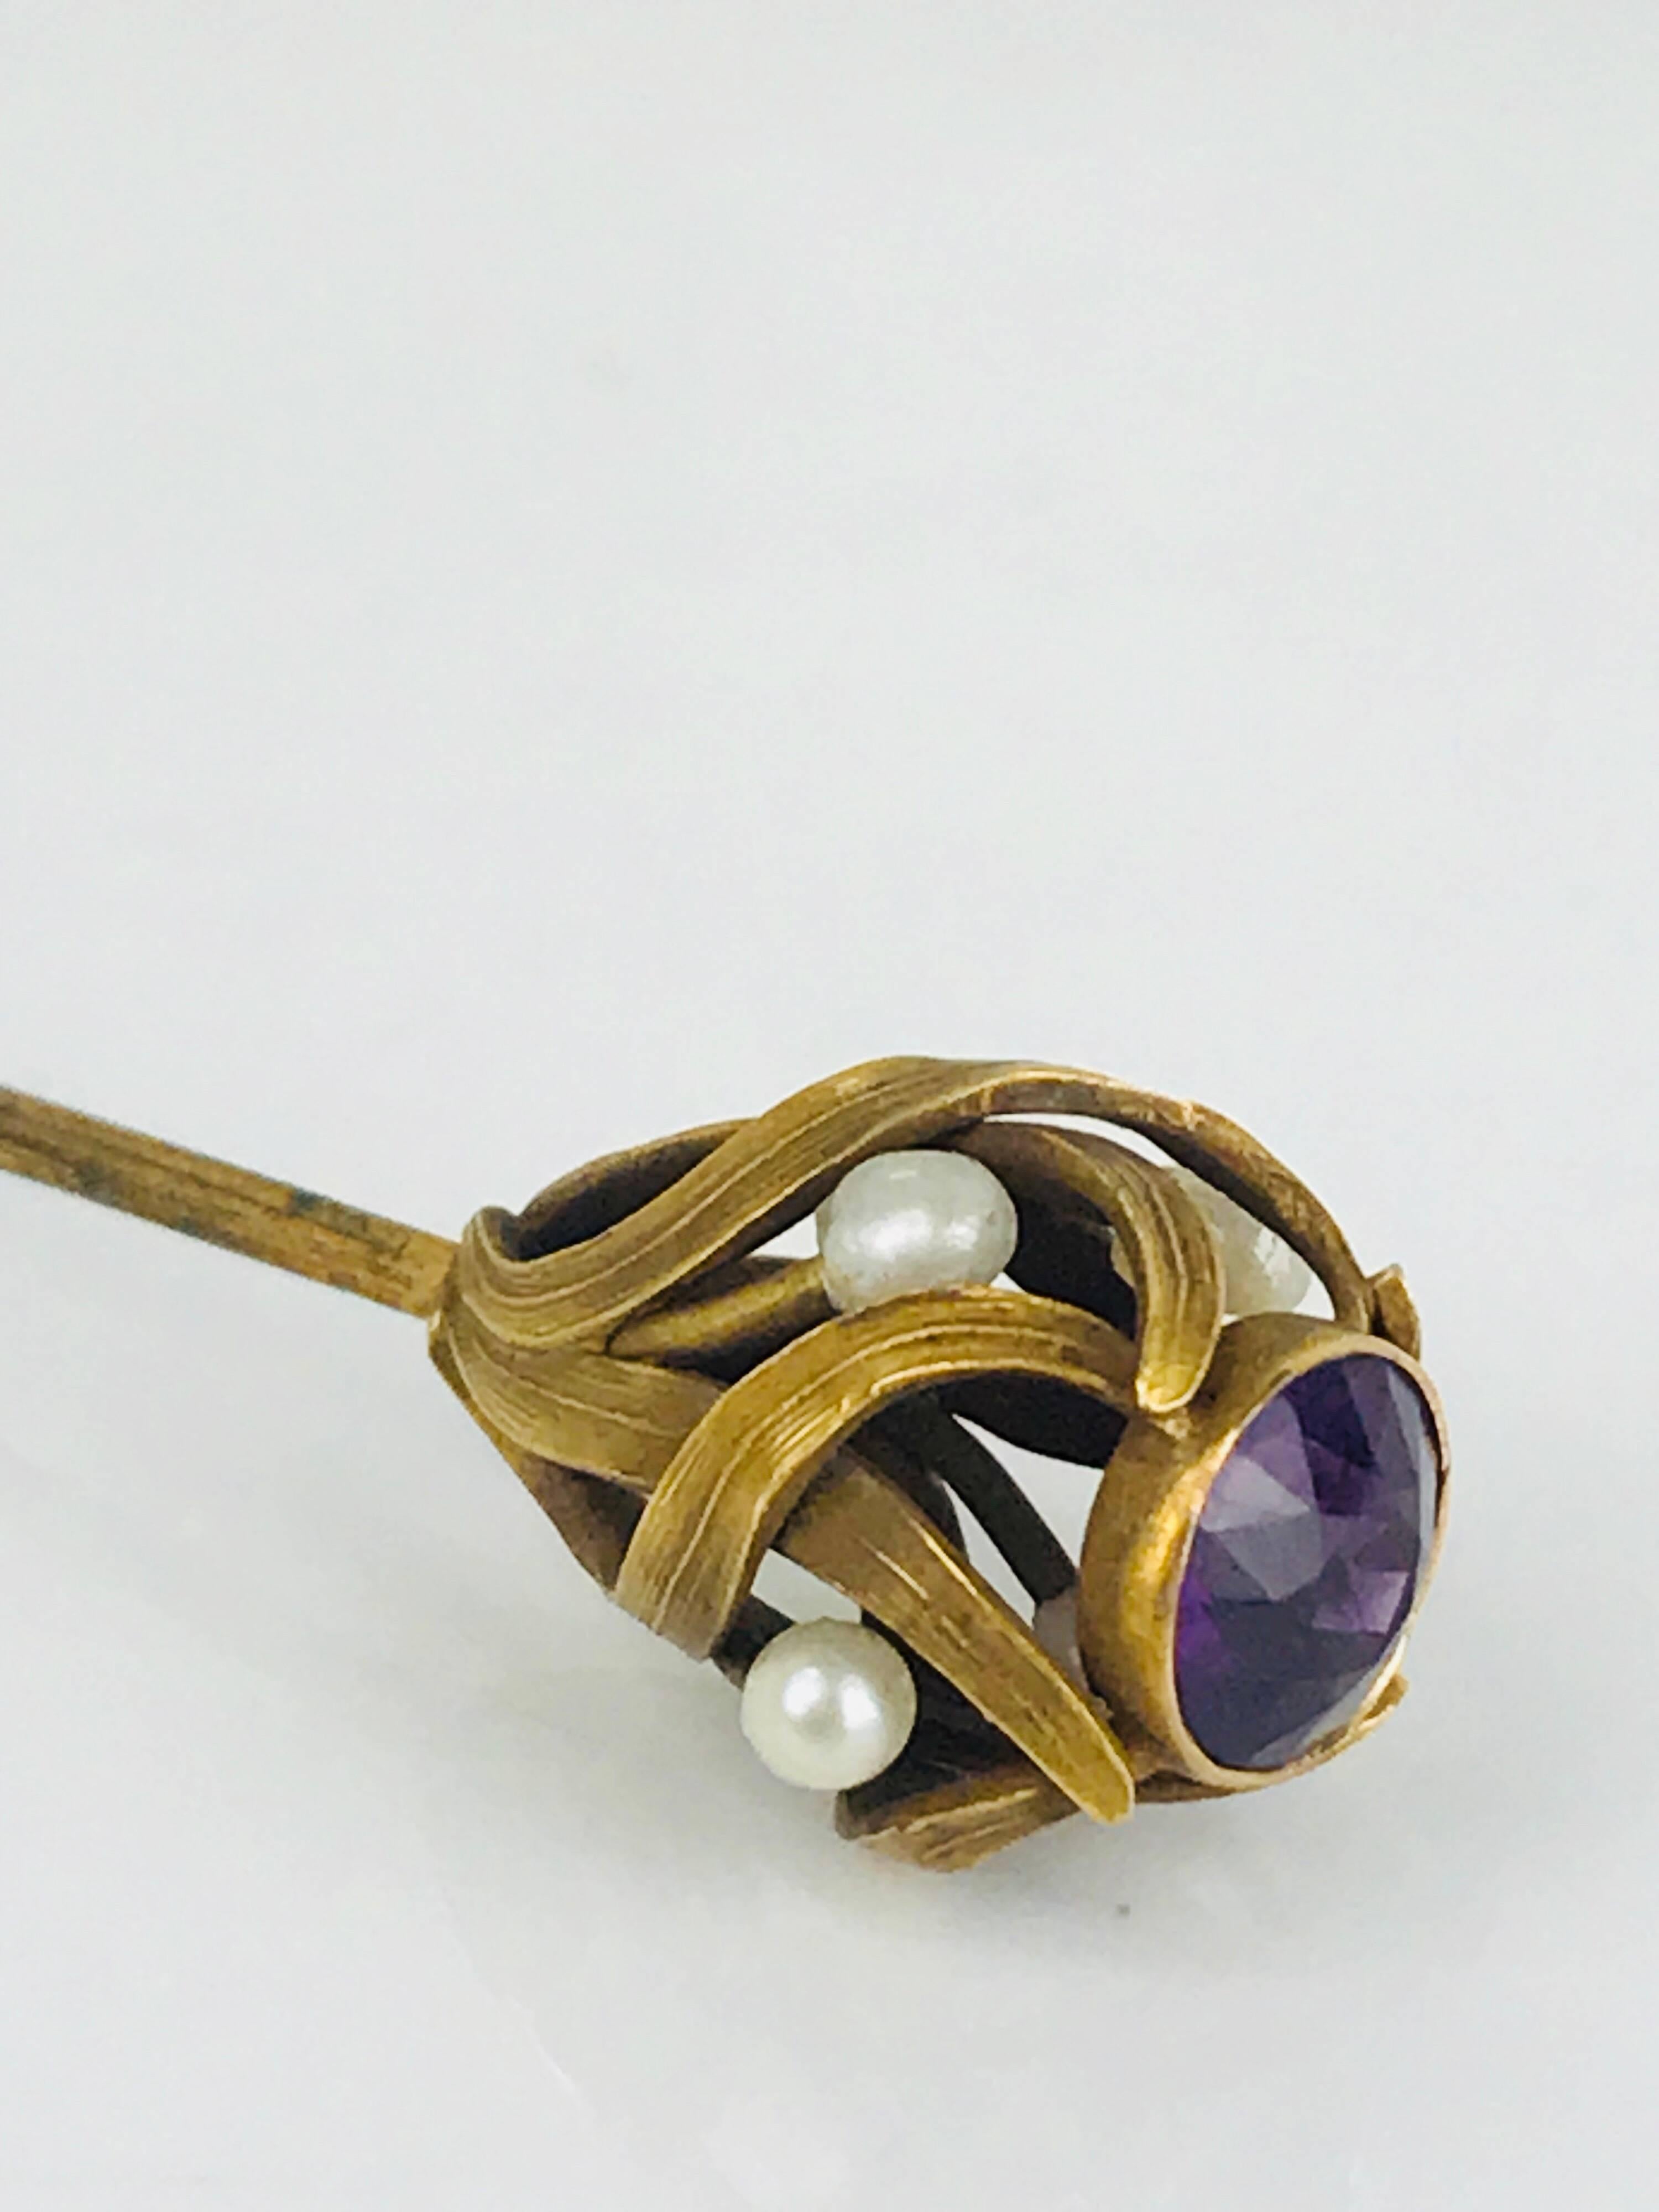 Victorian, 14 Karat Gold, Seed Pearl and Old Mine-Cut Amethyst Hat Pin, Circa 1840, features a bezel-set, round brilliant, old mine cut natural amethyst stone set at the top of the pinhead, and is accented by 4 seed pearls and graceful openwork